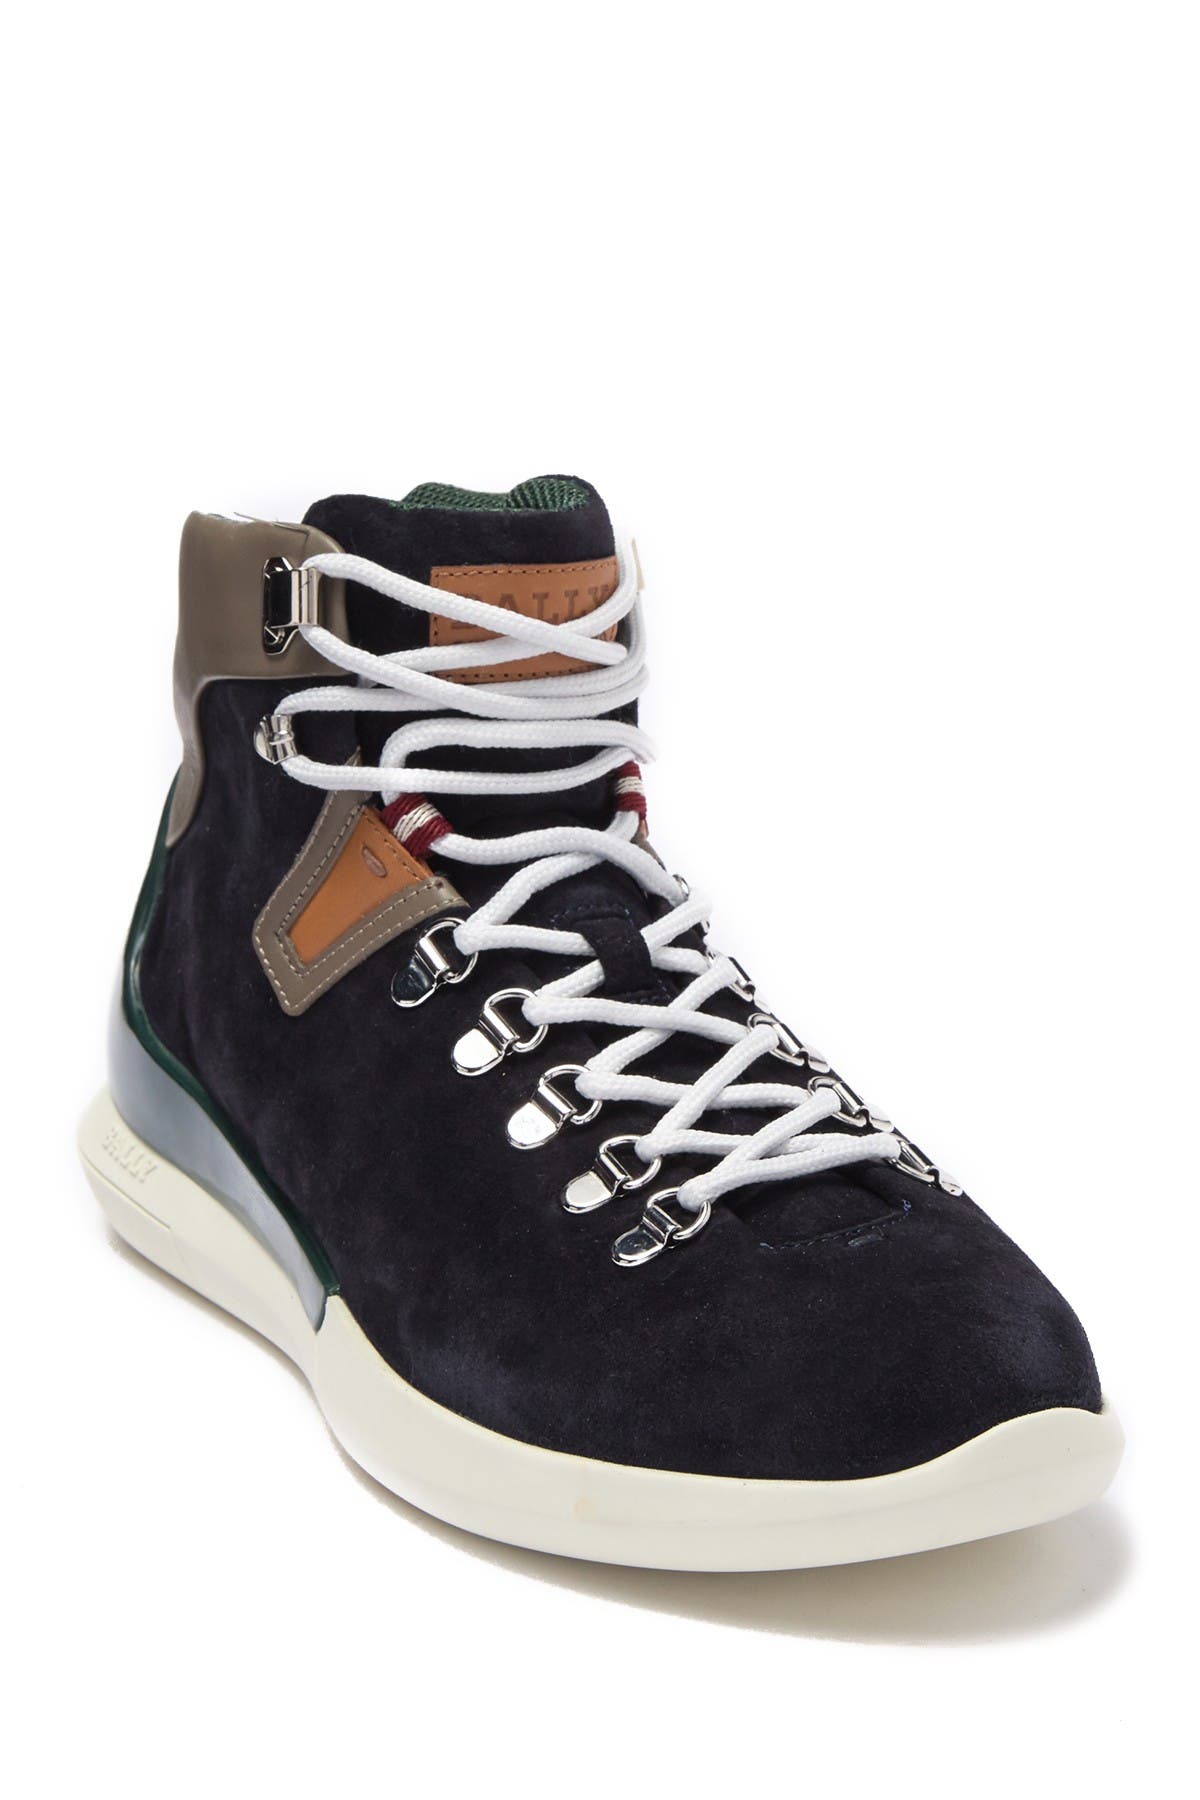 bally sneakers nordstrom